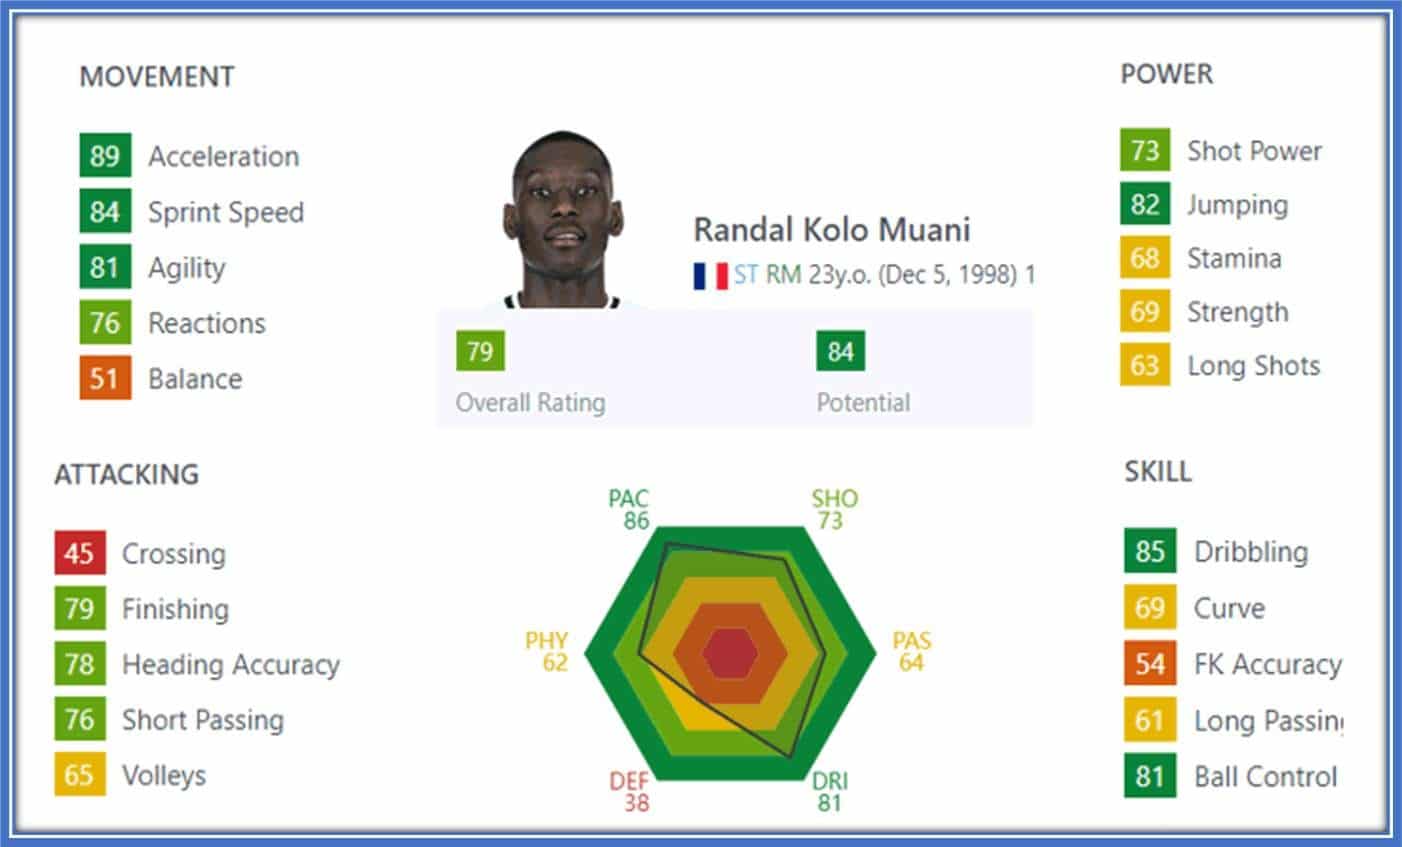 The French player has aone of the best overall potential rating of 84.